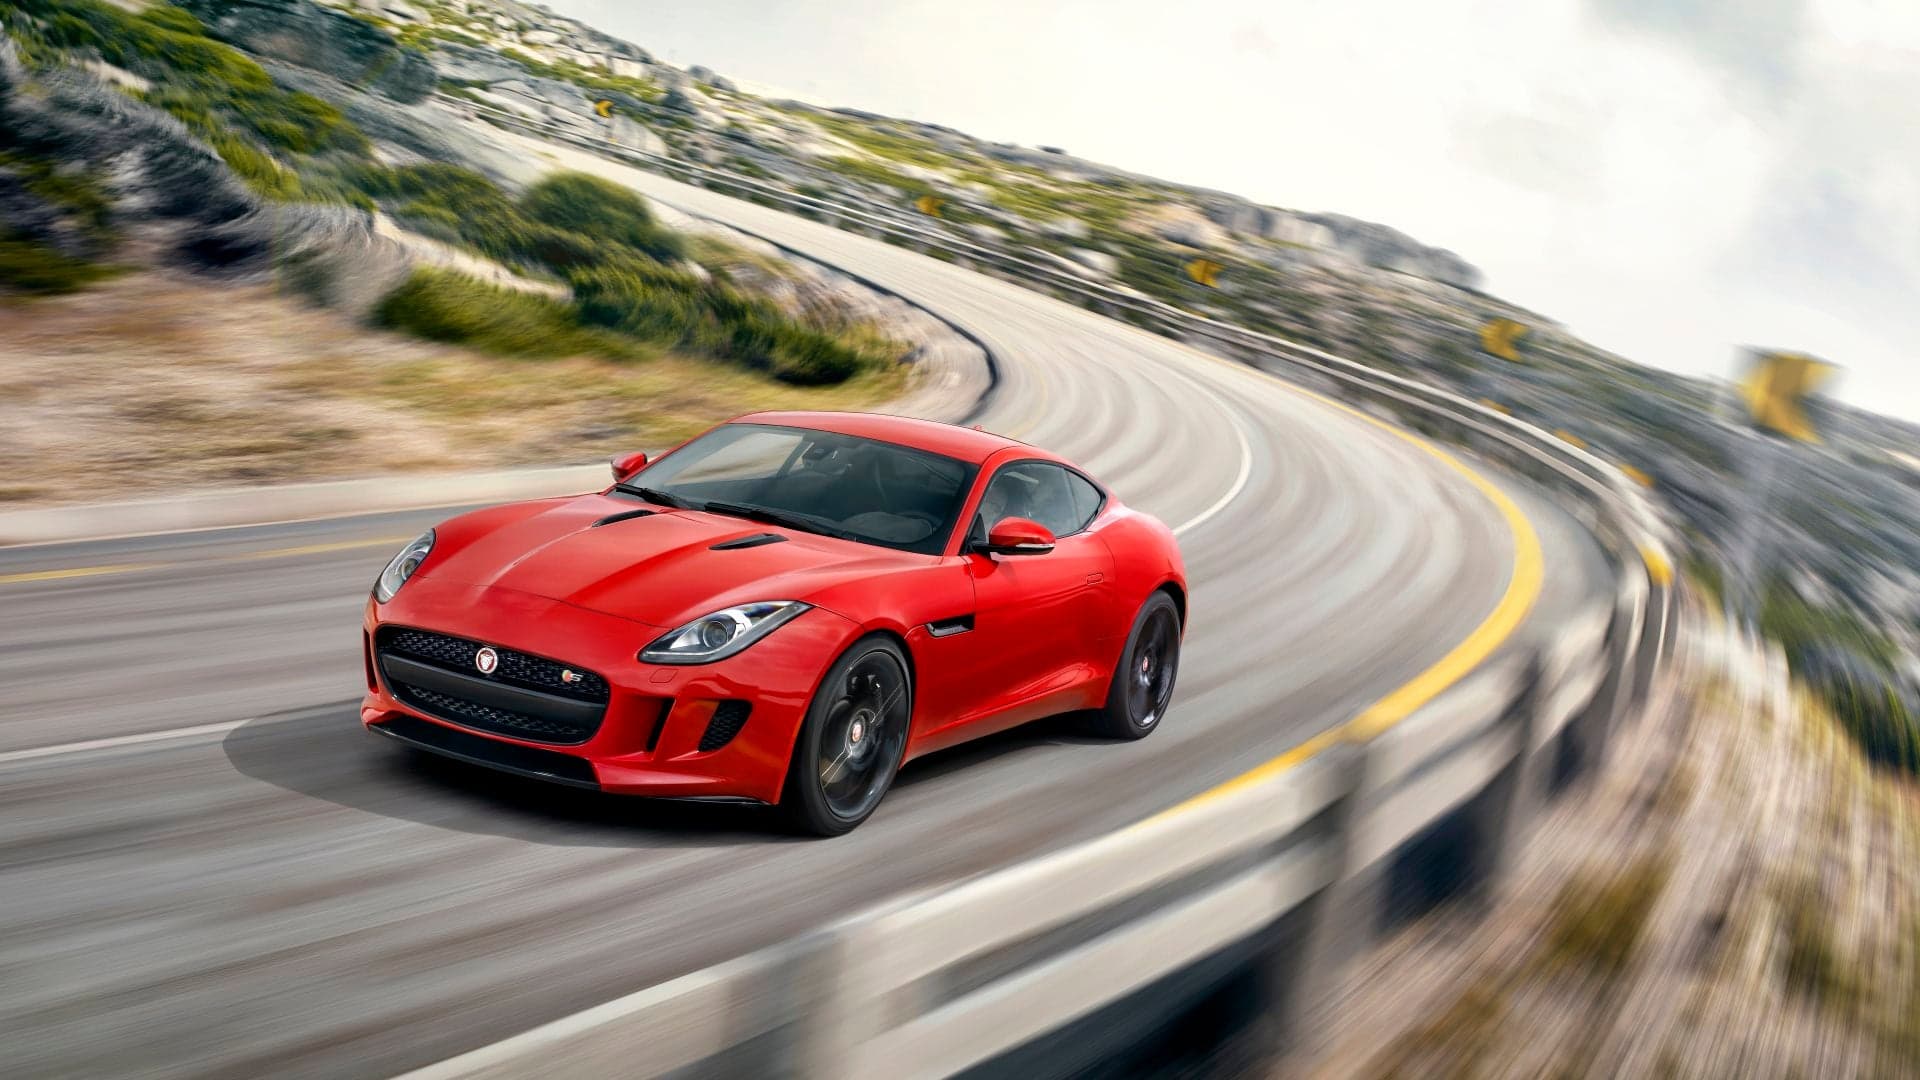 Jaguar May Turn to Hybrid Systems for Future Sports Cars